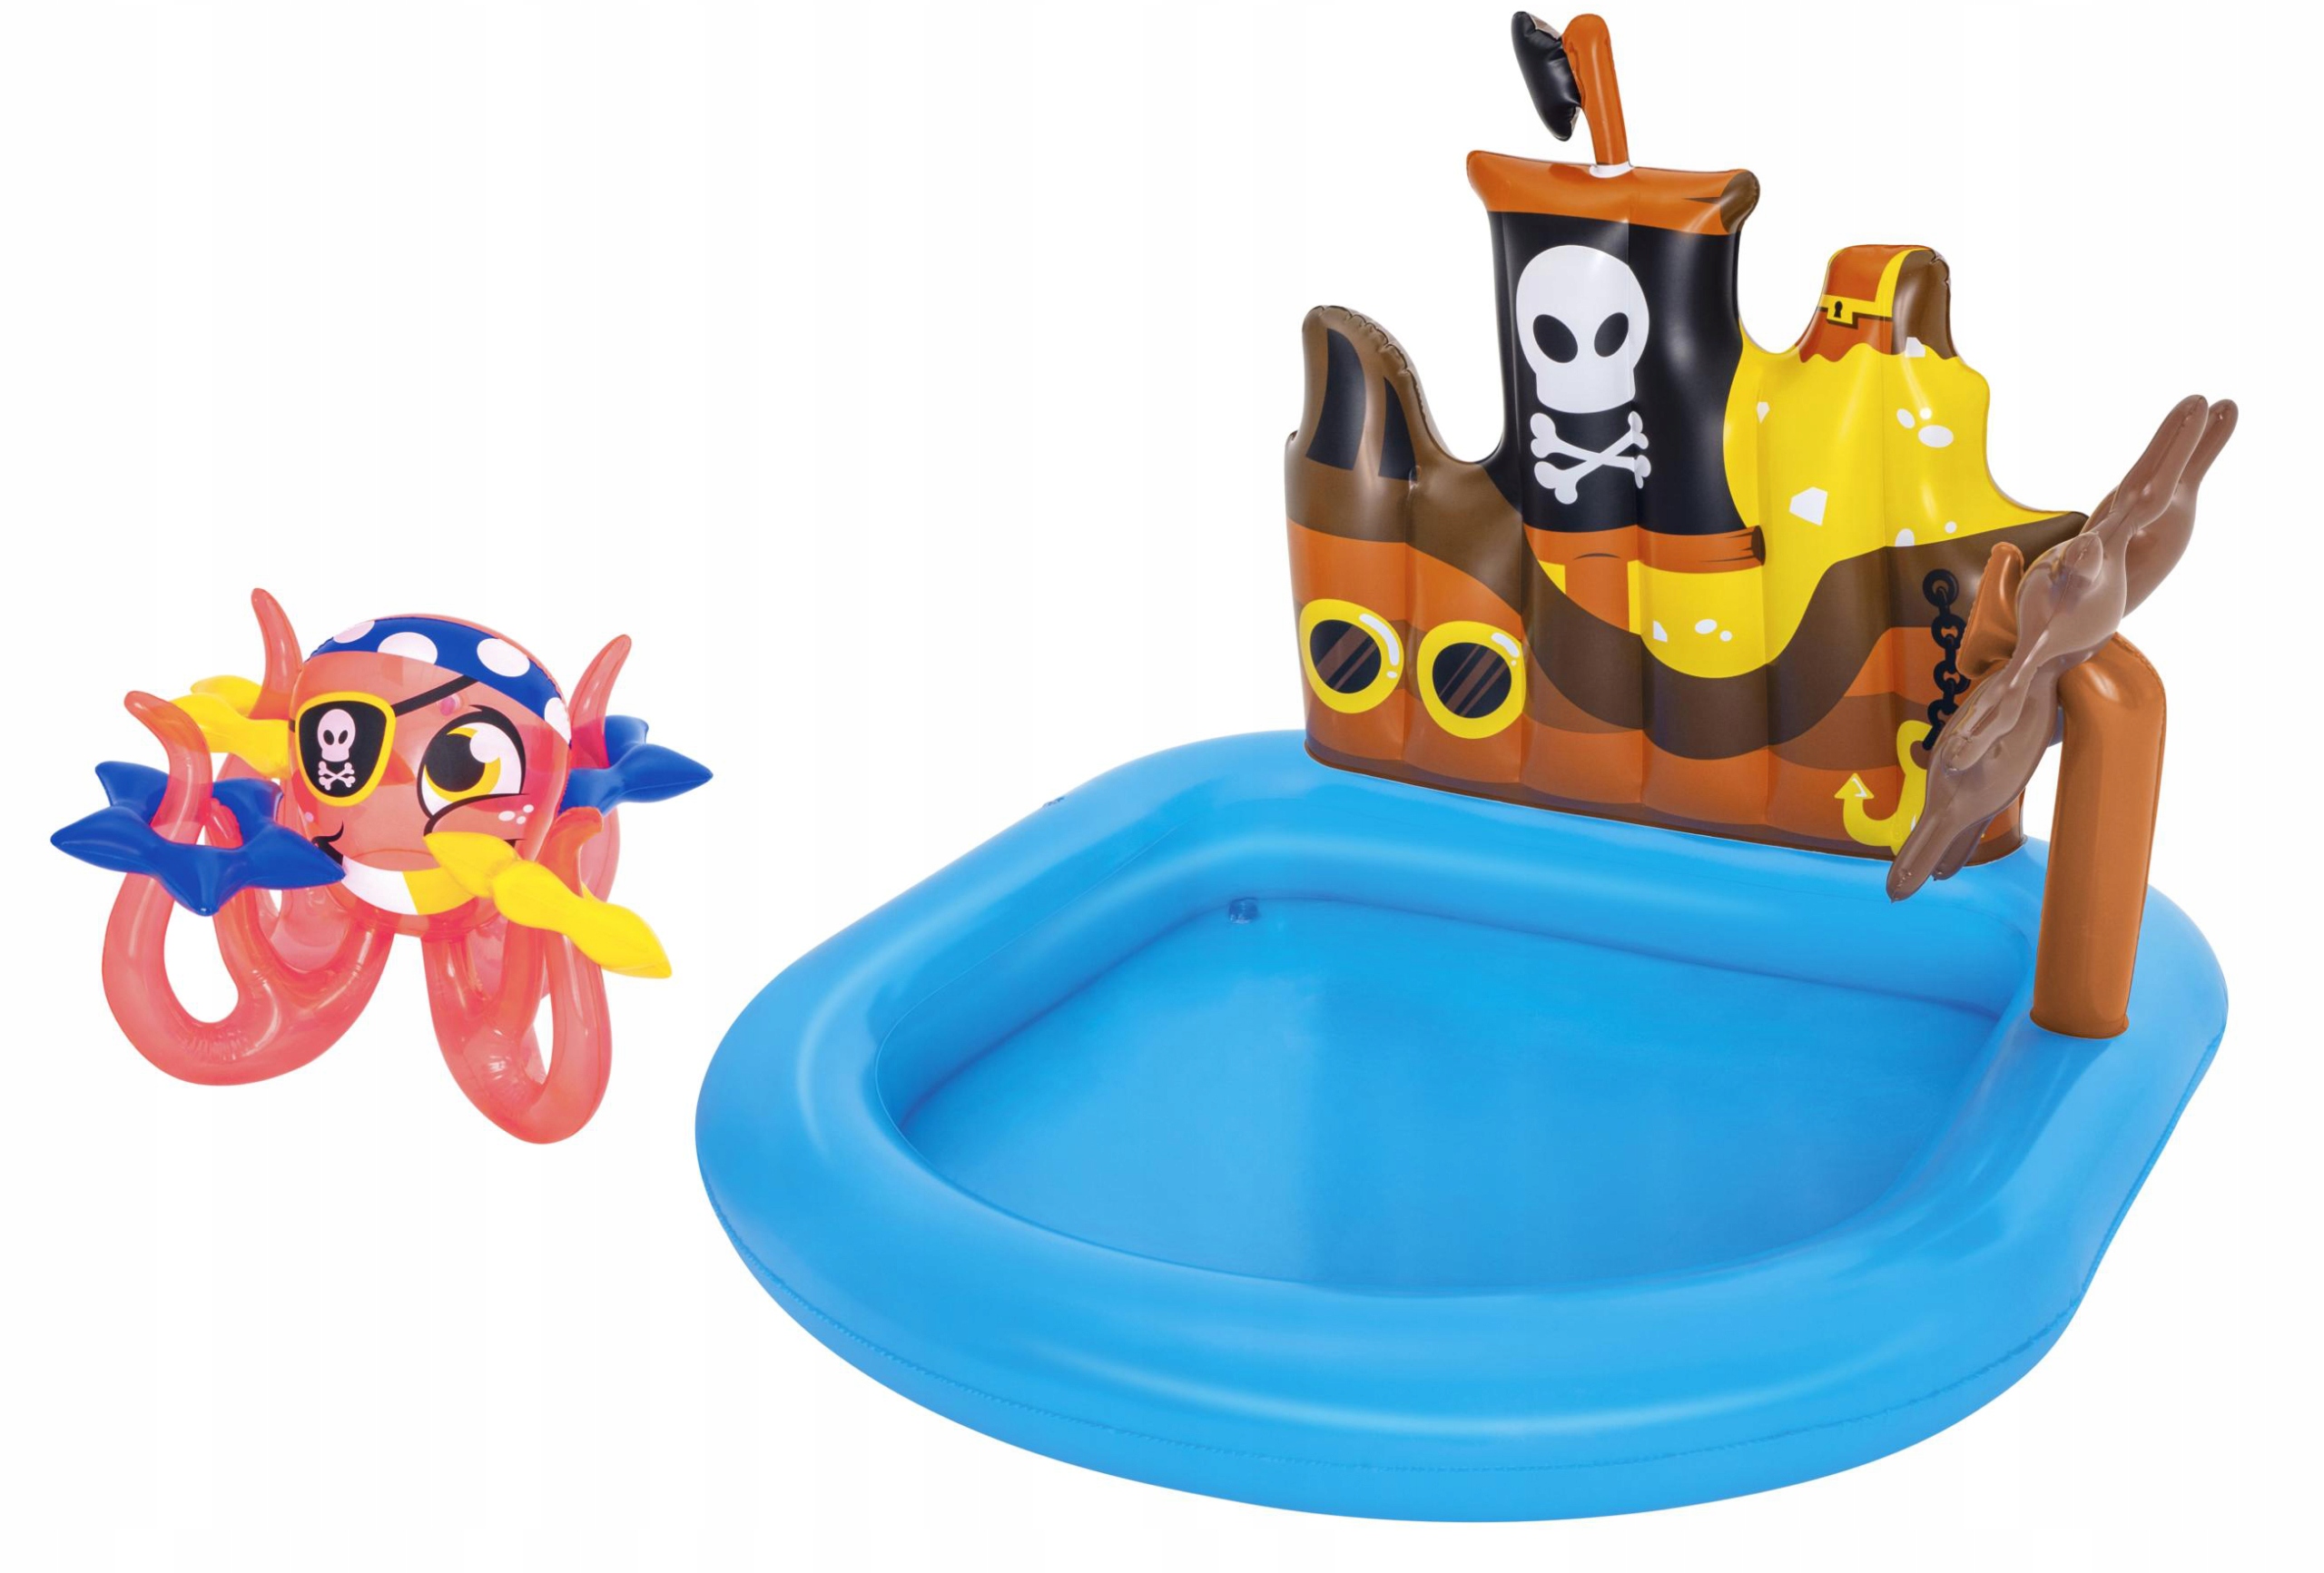 Dmuchany plac zabaw Bestway Ships Ahoy Play Center 52211